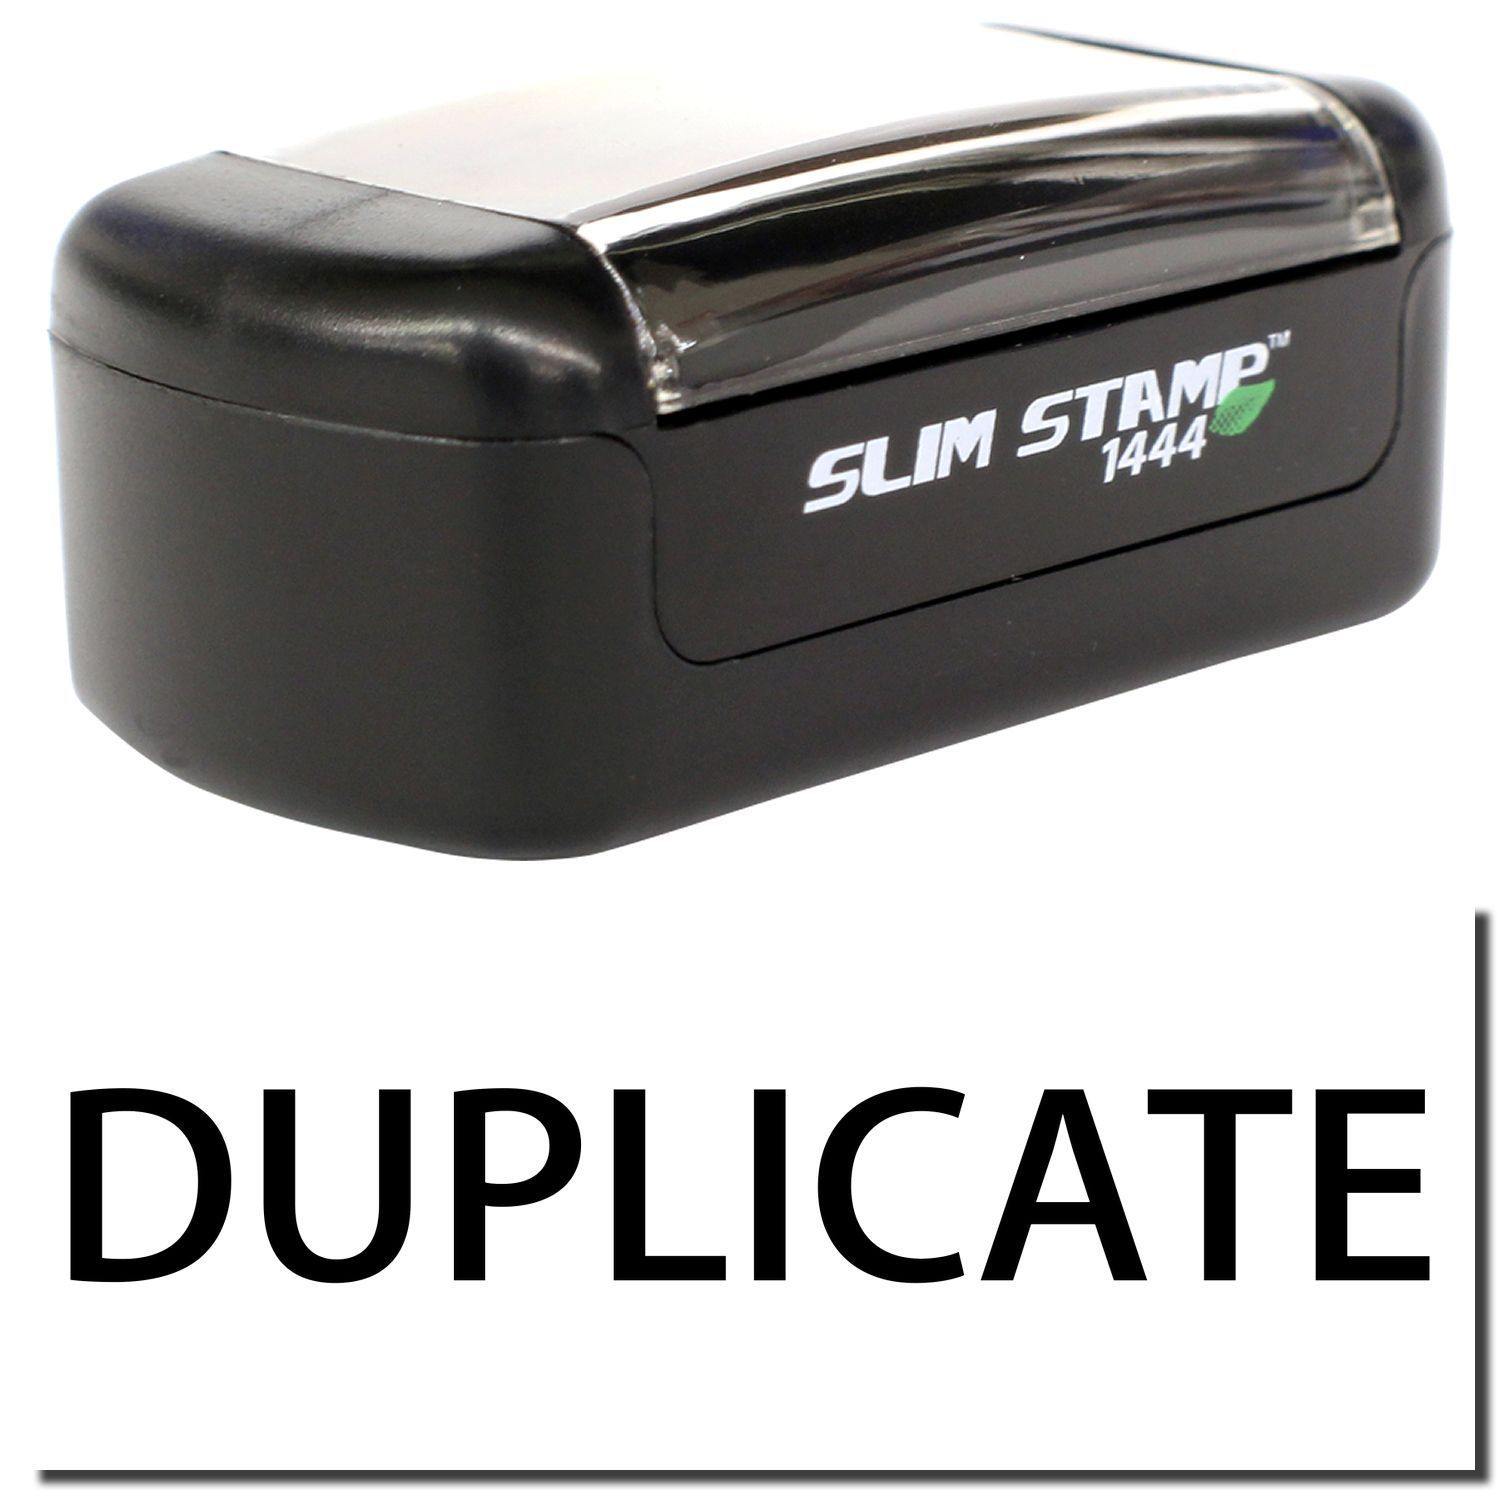 A stock office pre-inked stamp with a stamped image showing how the text "DUPLICATE" is displayed after stamping.